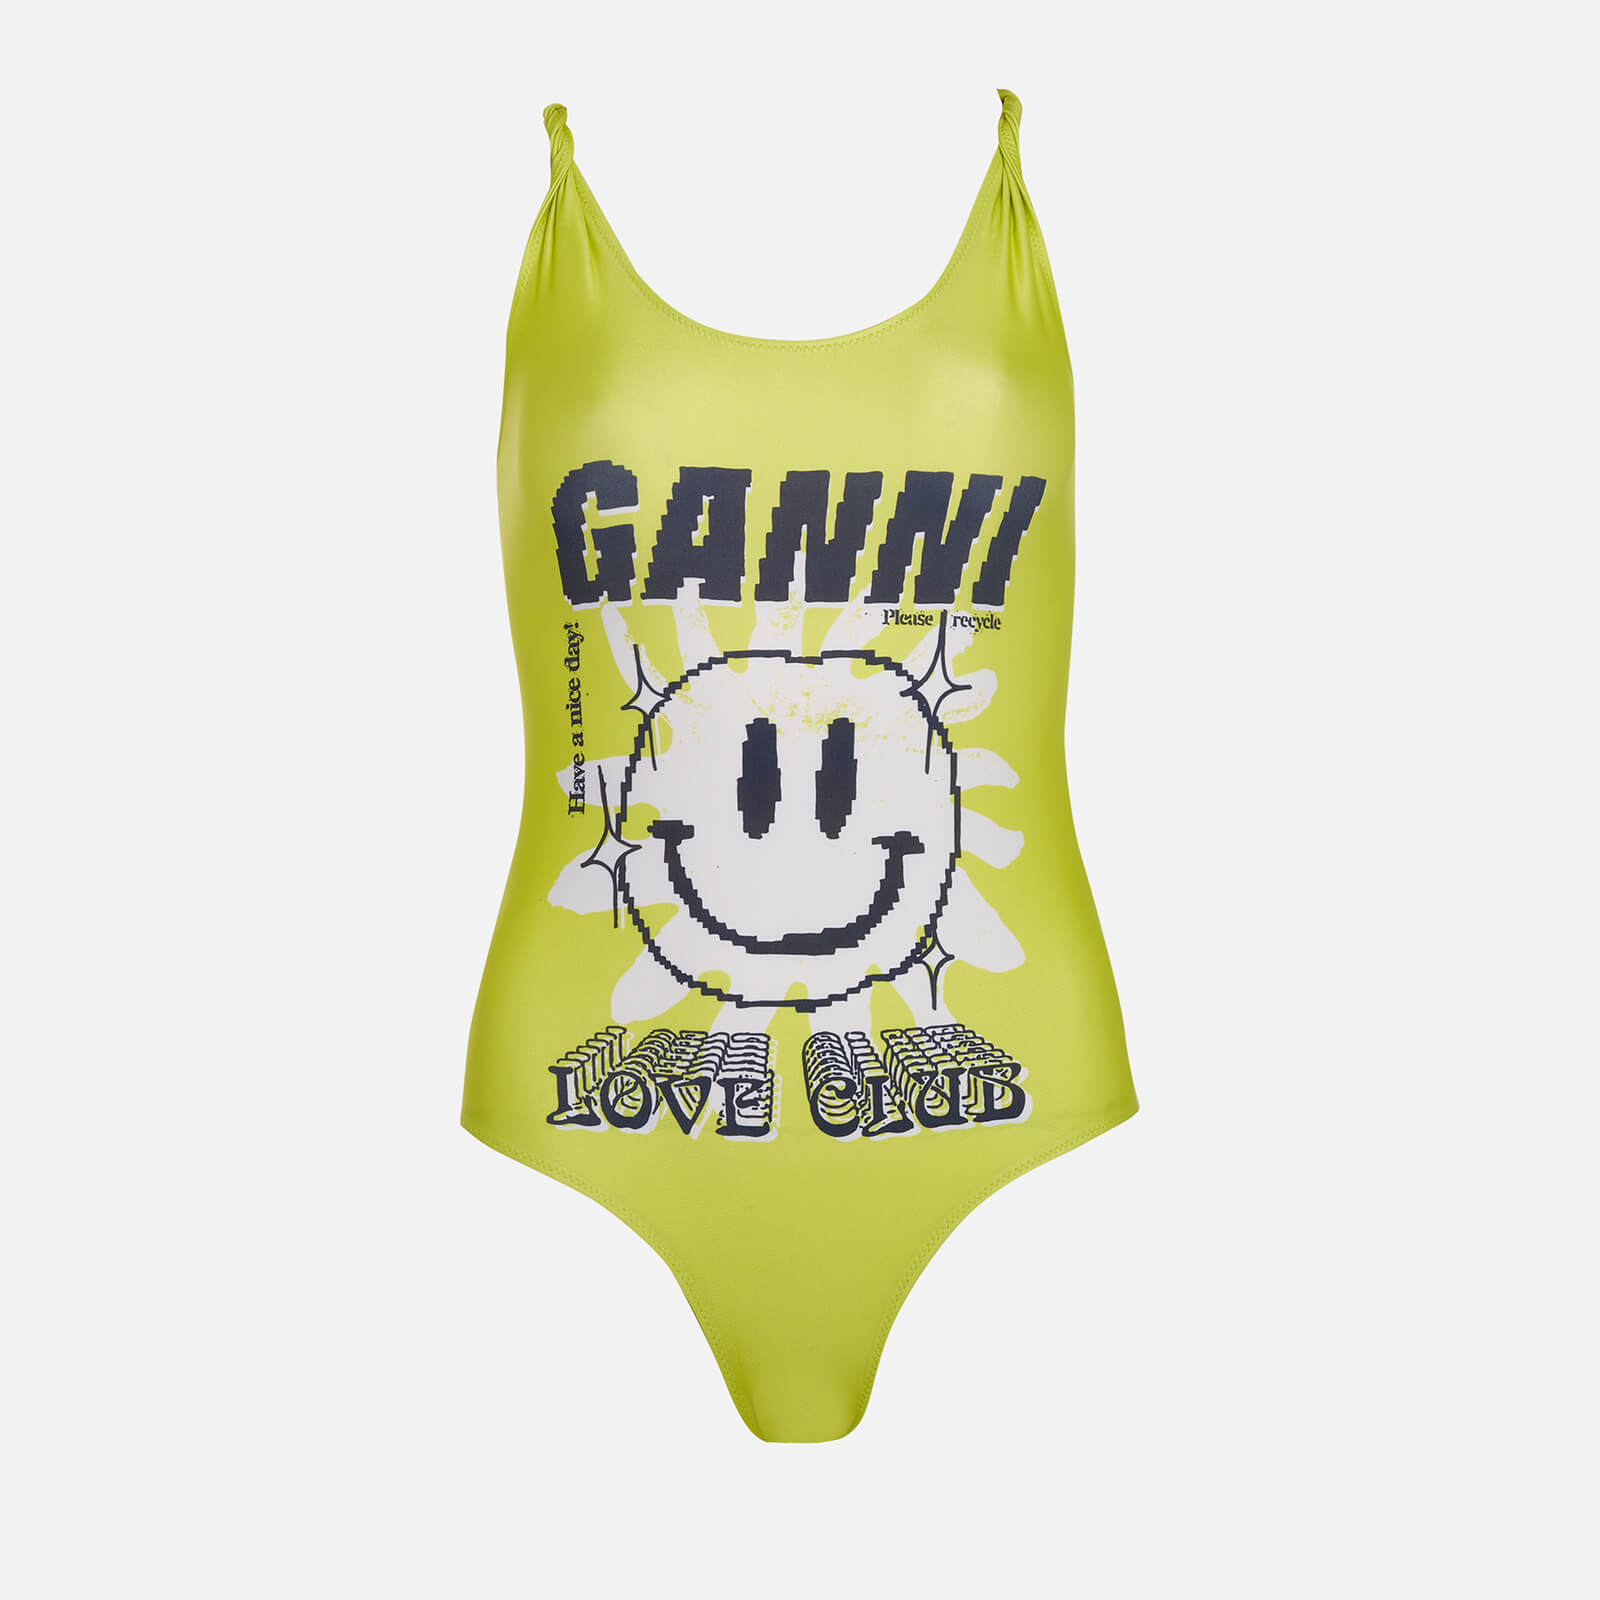 Ganni Women's Recycled Graphic Smiley Face Swimsuit - Blazing Yellow - EU 36/UK 8